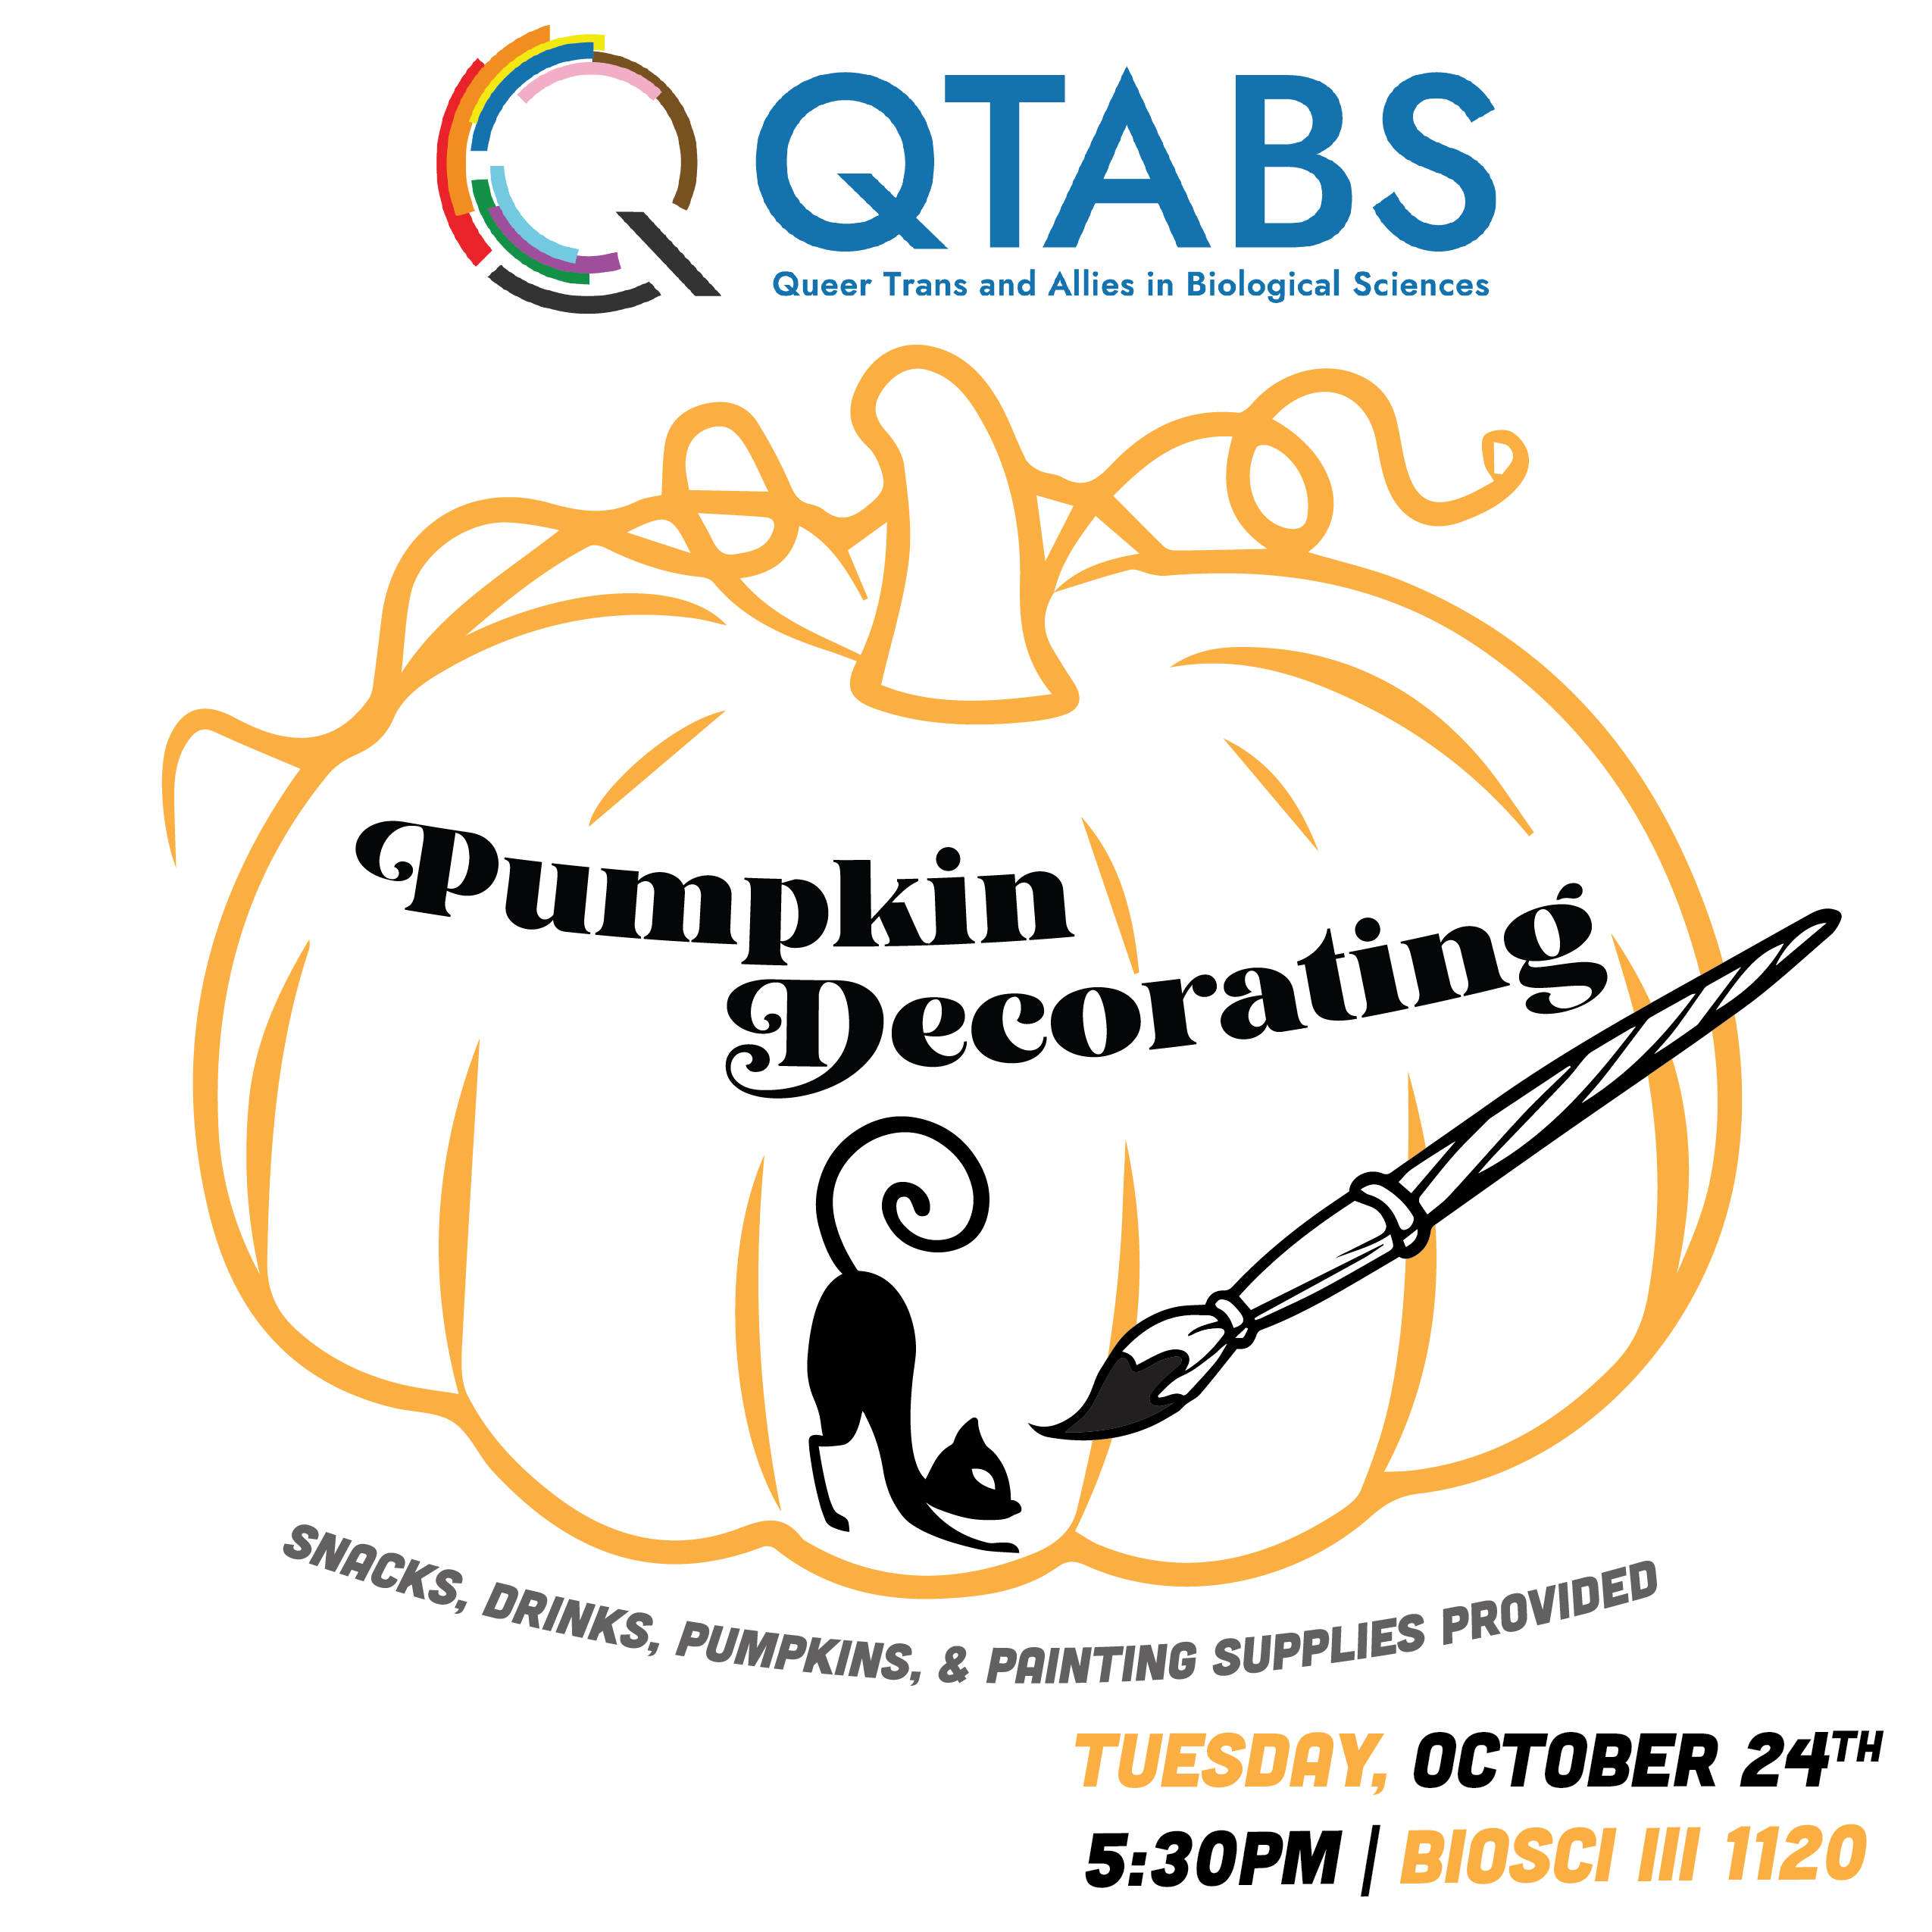 Queer Trans and Allies in Biological Sciences (QTABS) invites you to join us on Tuesday, October 24 in Biological Sciences 3, Room 1120 at 5:30PM as we socialize and build community while decorating pumpkins!